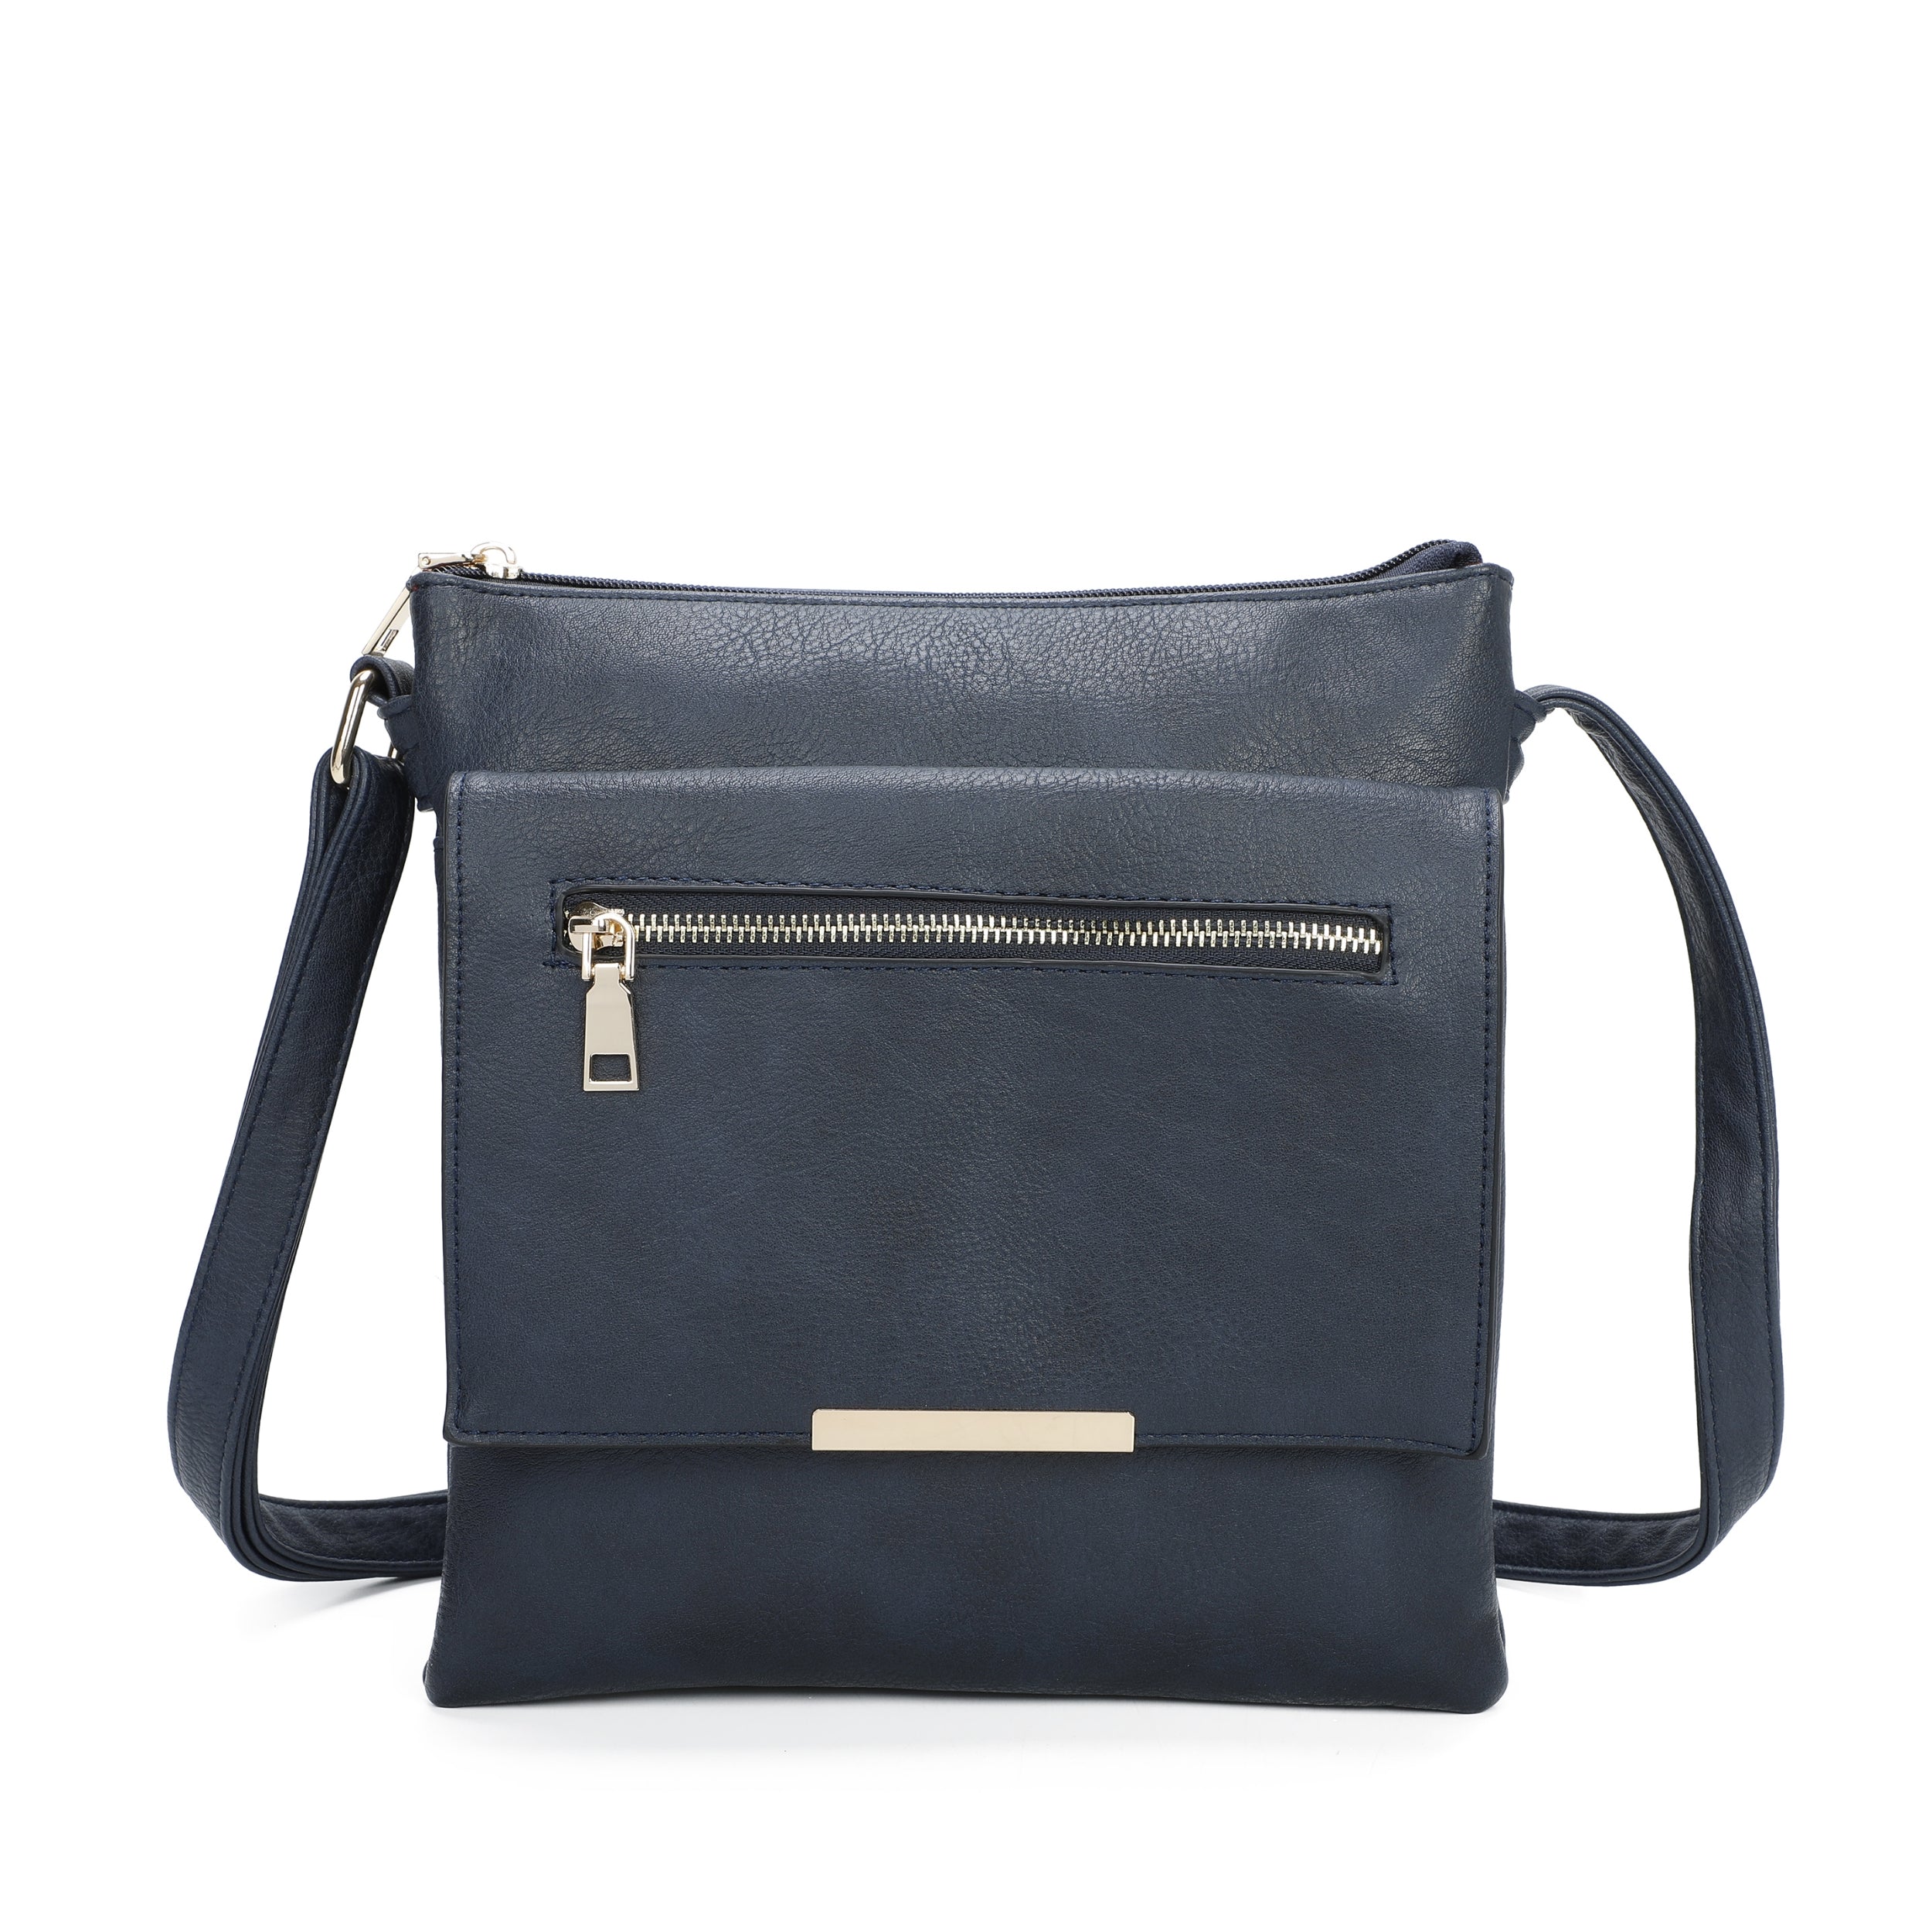 Craze London Crossbody bag with Front zip and Magdot